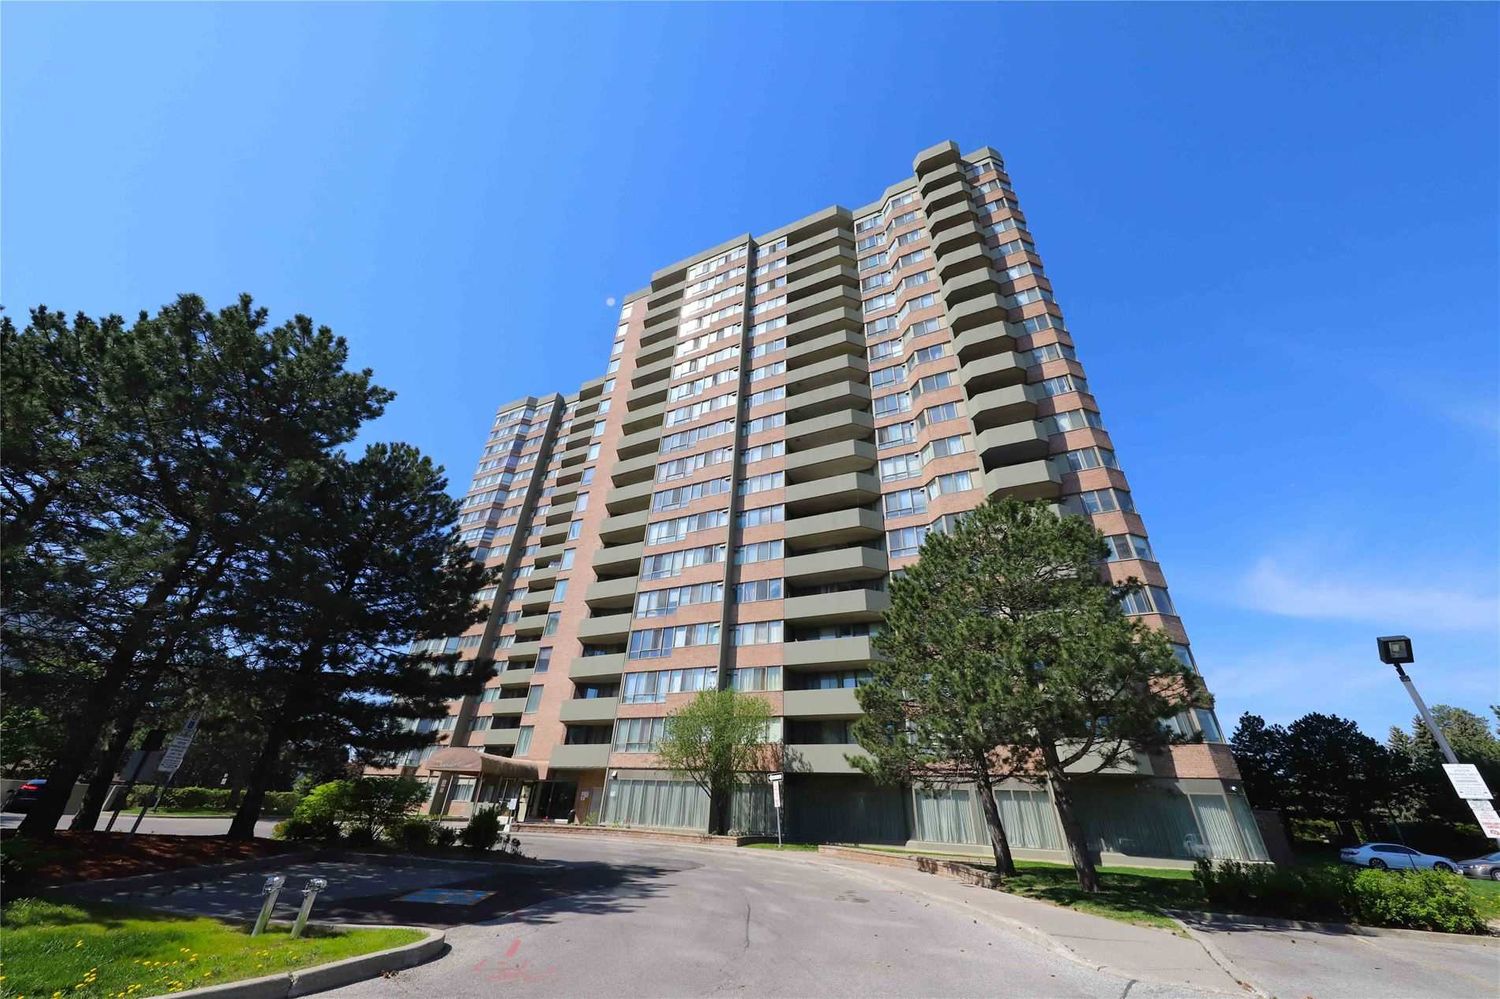 30 Thunder Grove. Wedgewood Grove Condos is located in  Scarborough, Toronto - image #1 of 3